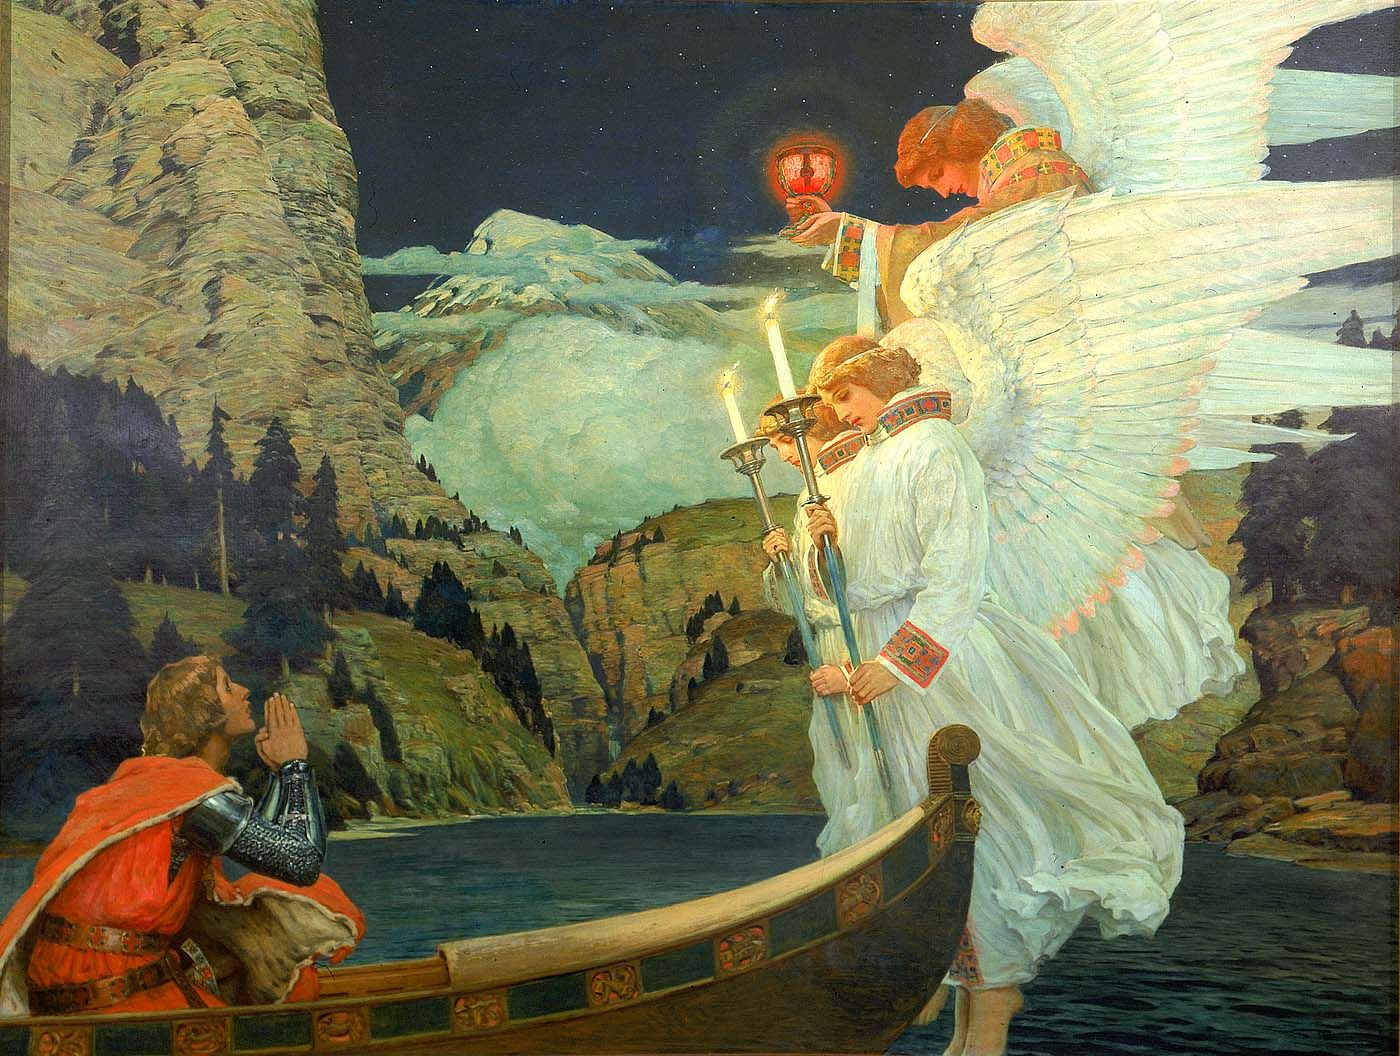 Frederick-J-Waugh-The-Knight-of-the-Holy-Grail-1912-fine-art-30227320-1400-1056_zps5fb2a950.jpg